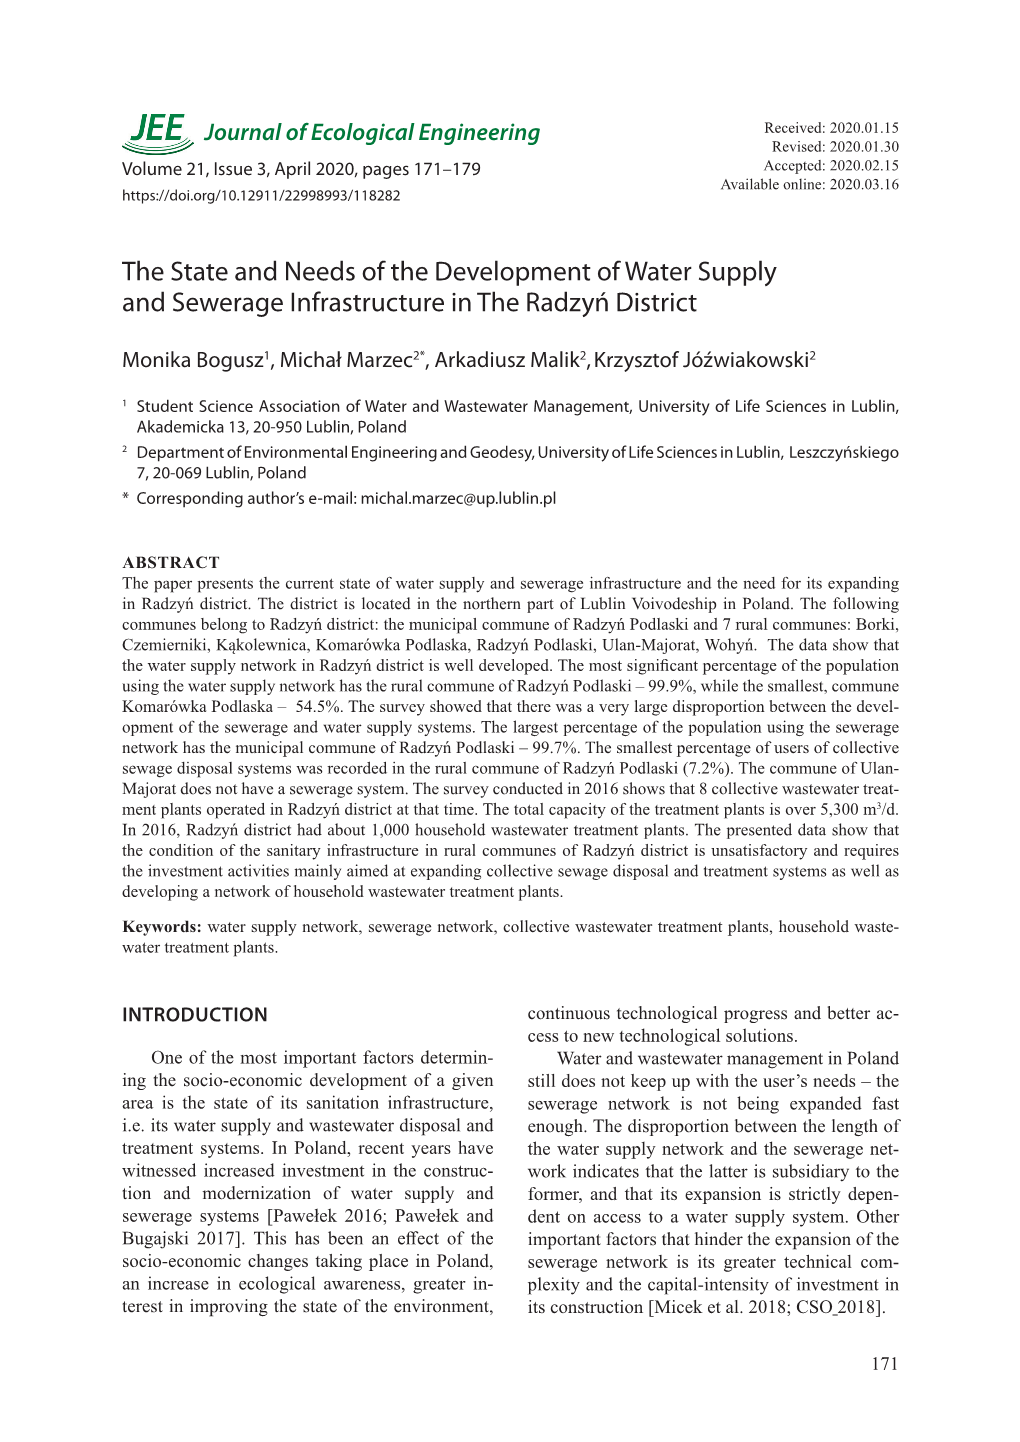 The State and Needs of the Development of Water Supply and Sewerage Infrastructure in the Radzyń District